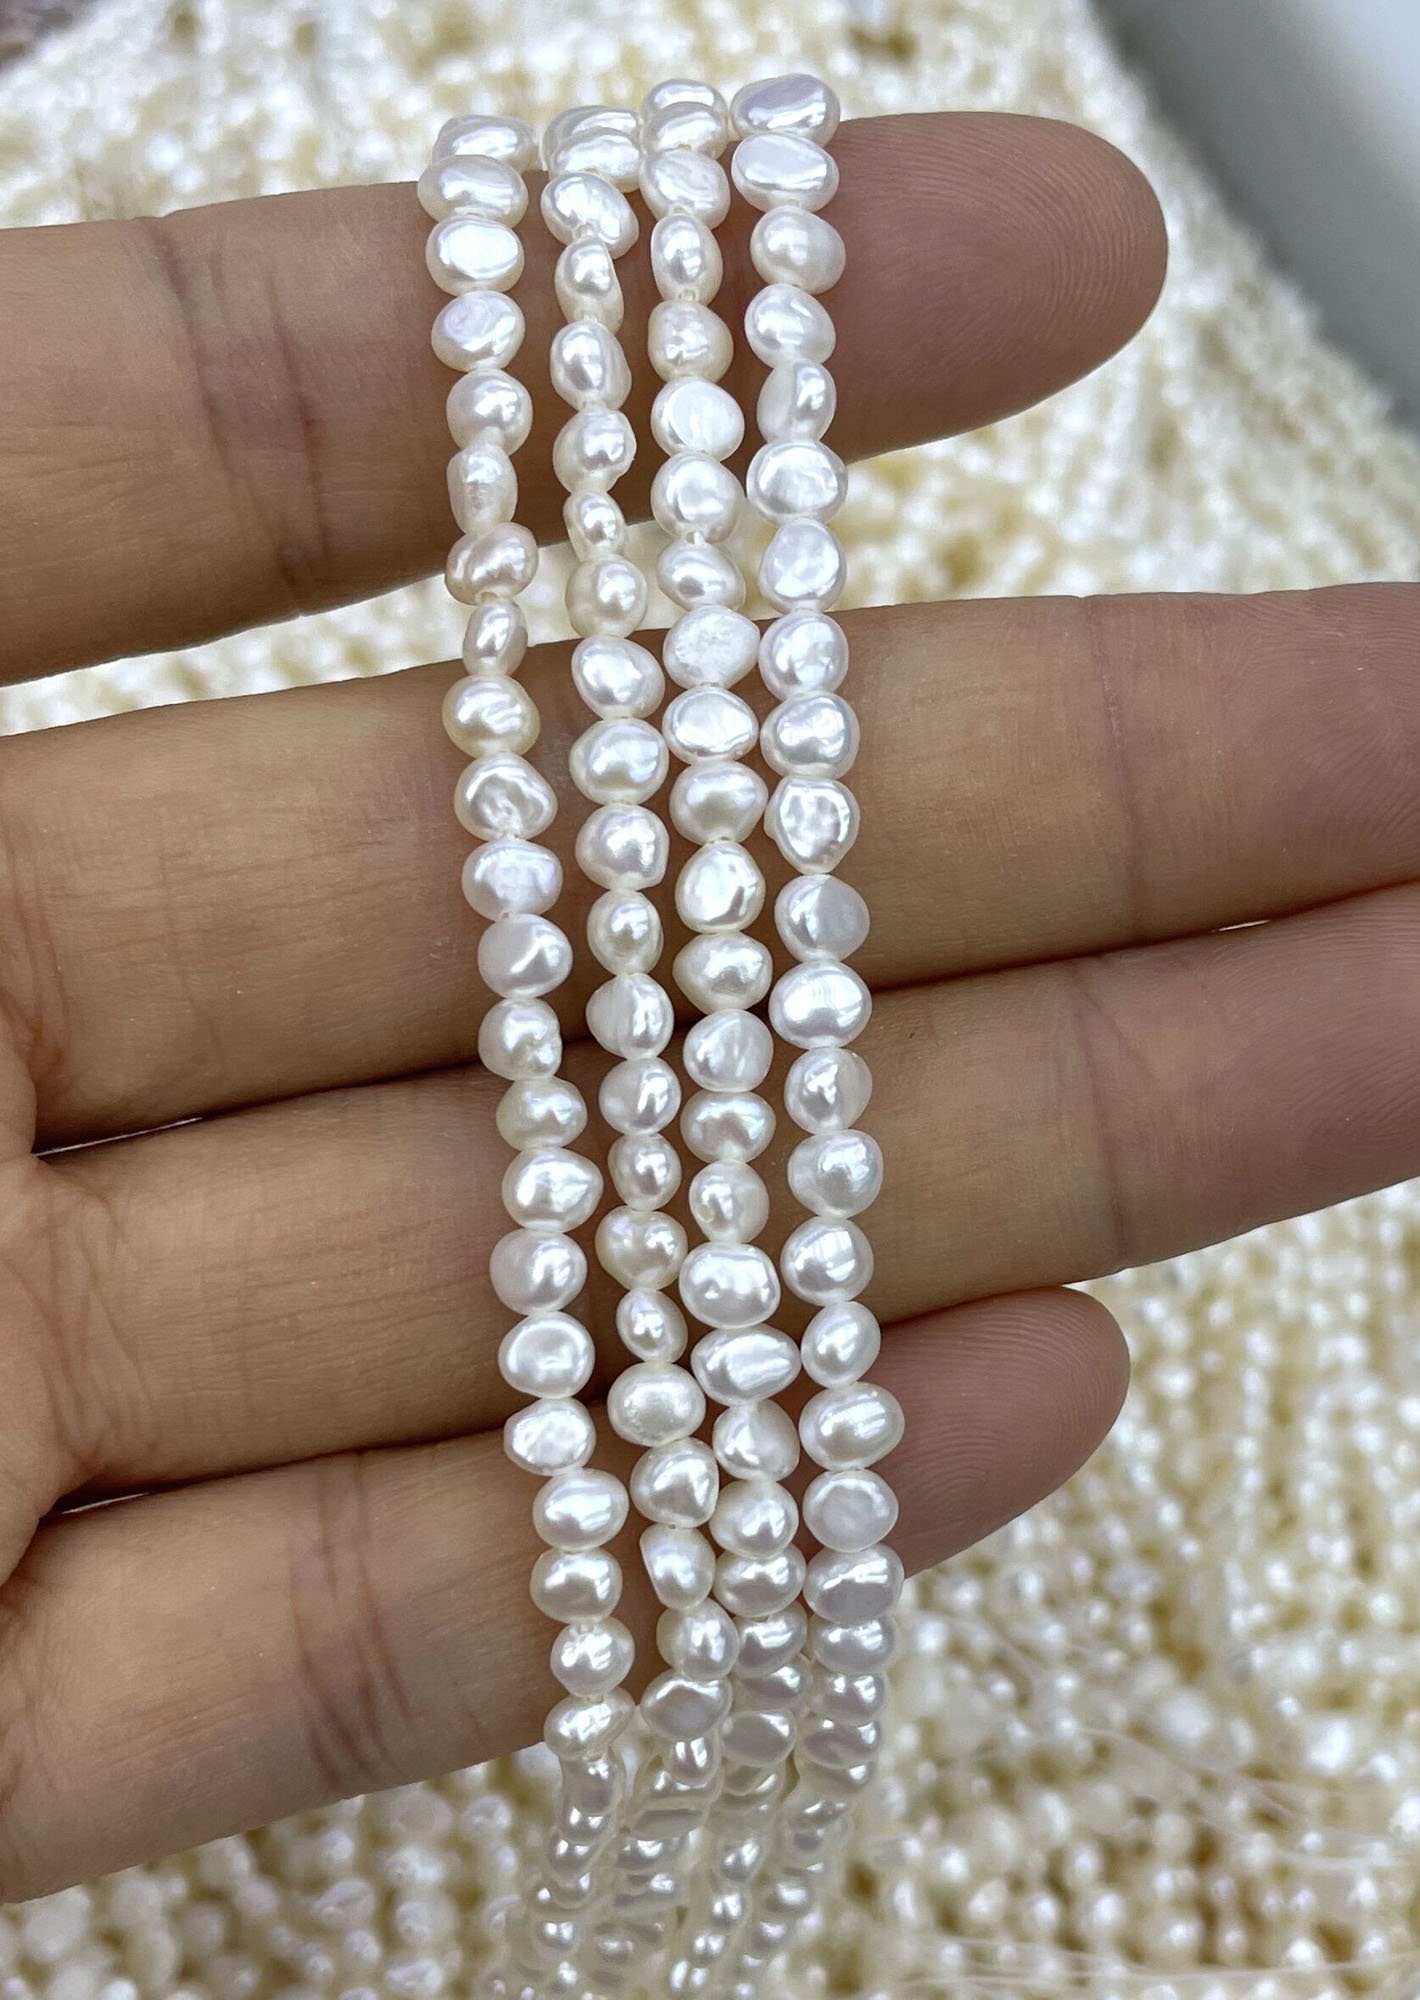 2-3mm Pearl beads, freshwater pearl,loose baroque pearl,tiny pearl